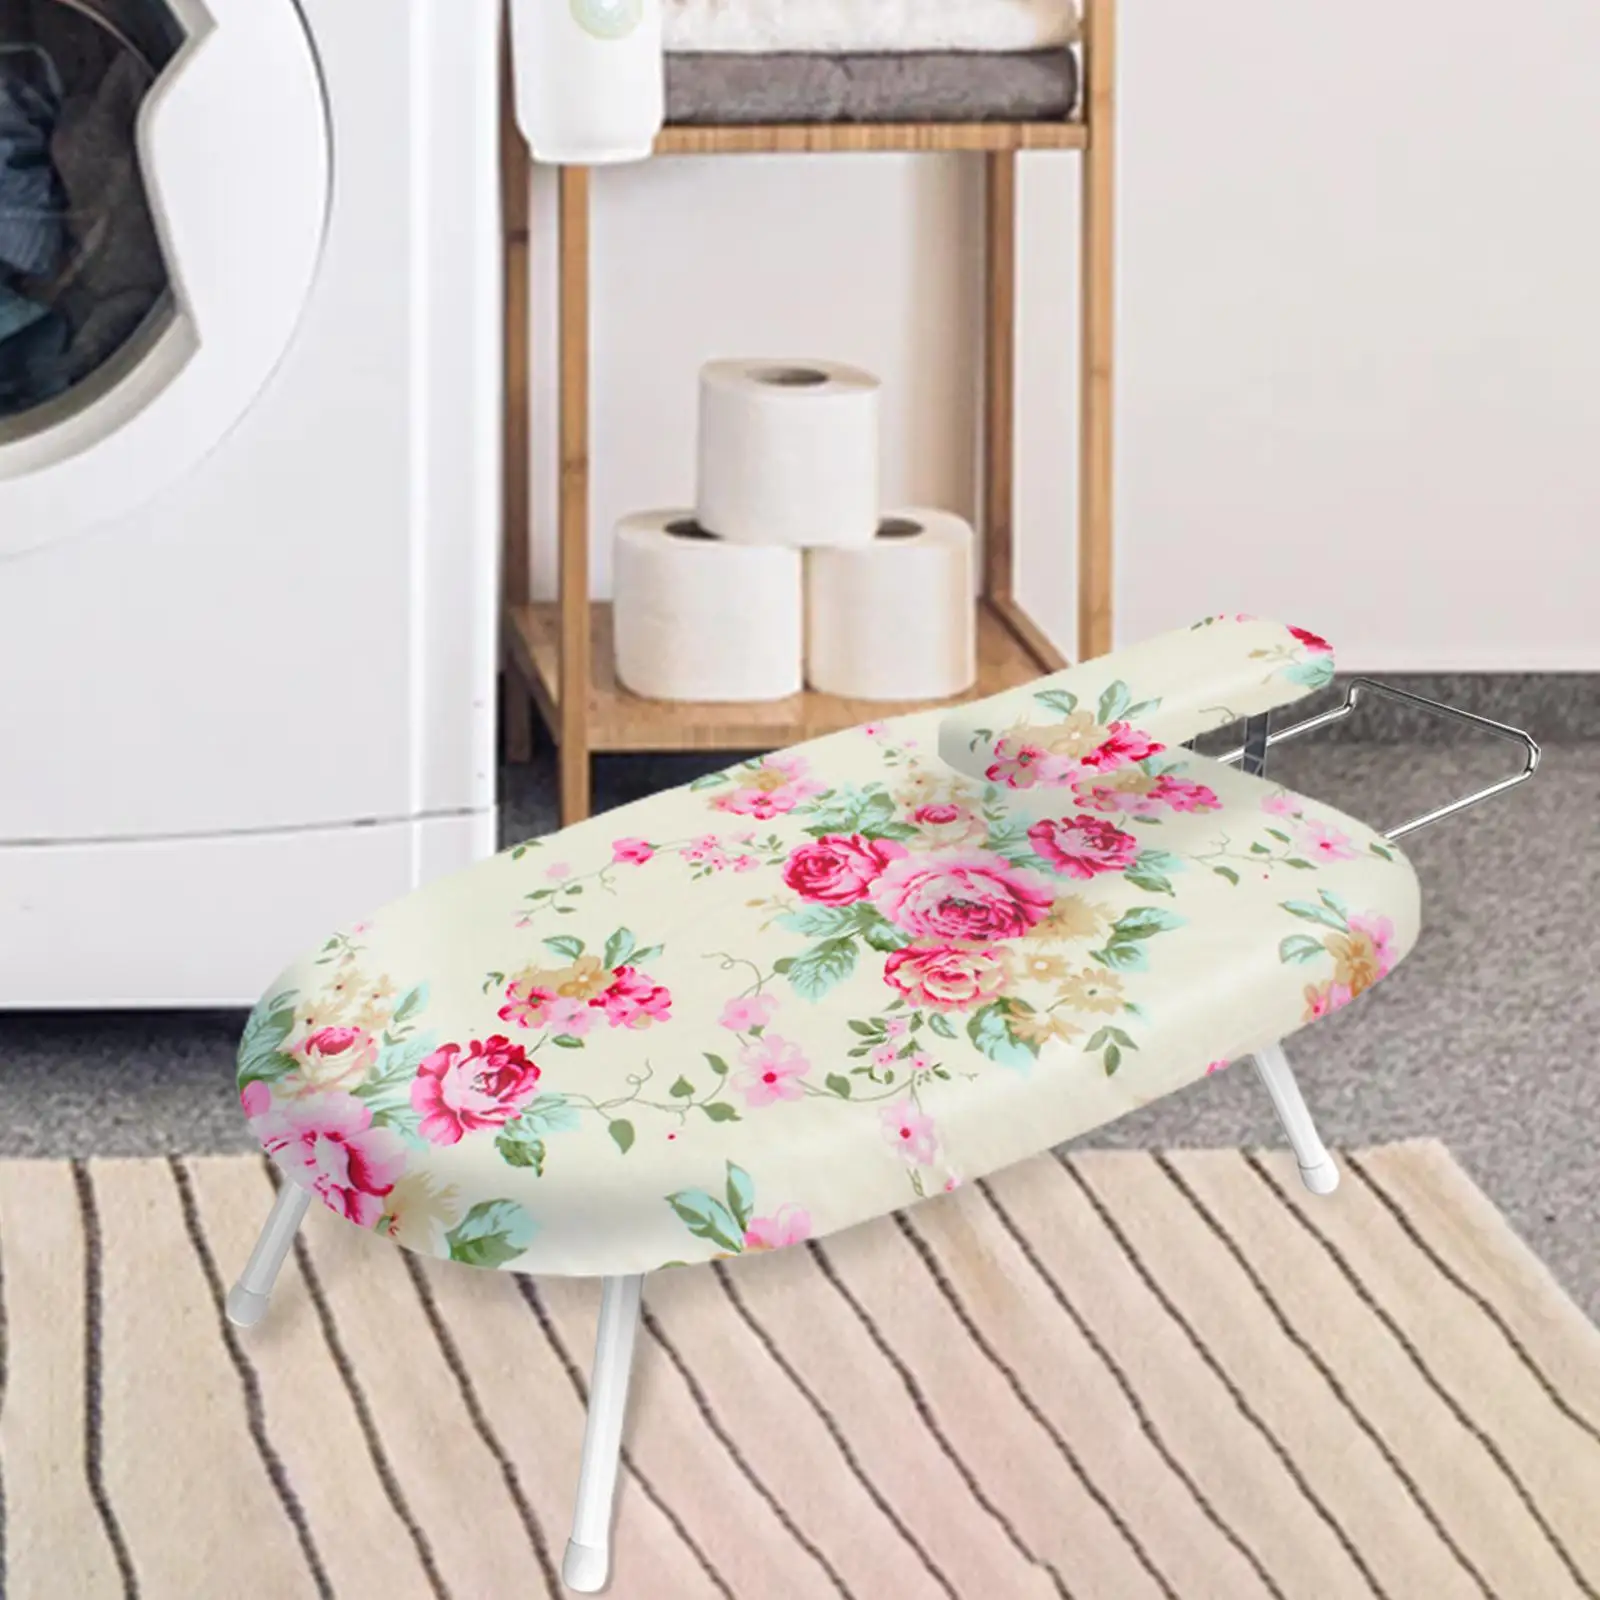 Countertop Ironing Board with Fixed Sleeve Folding Portable for Home Ironing Clothes